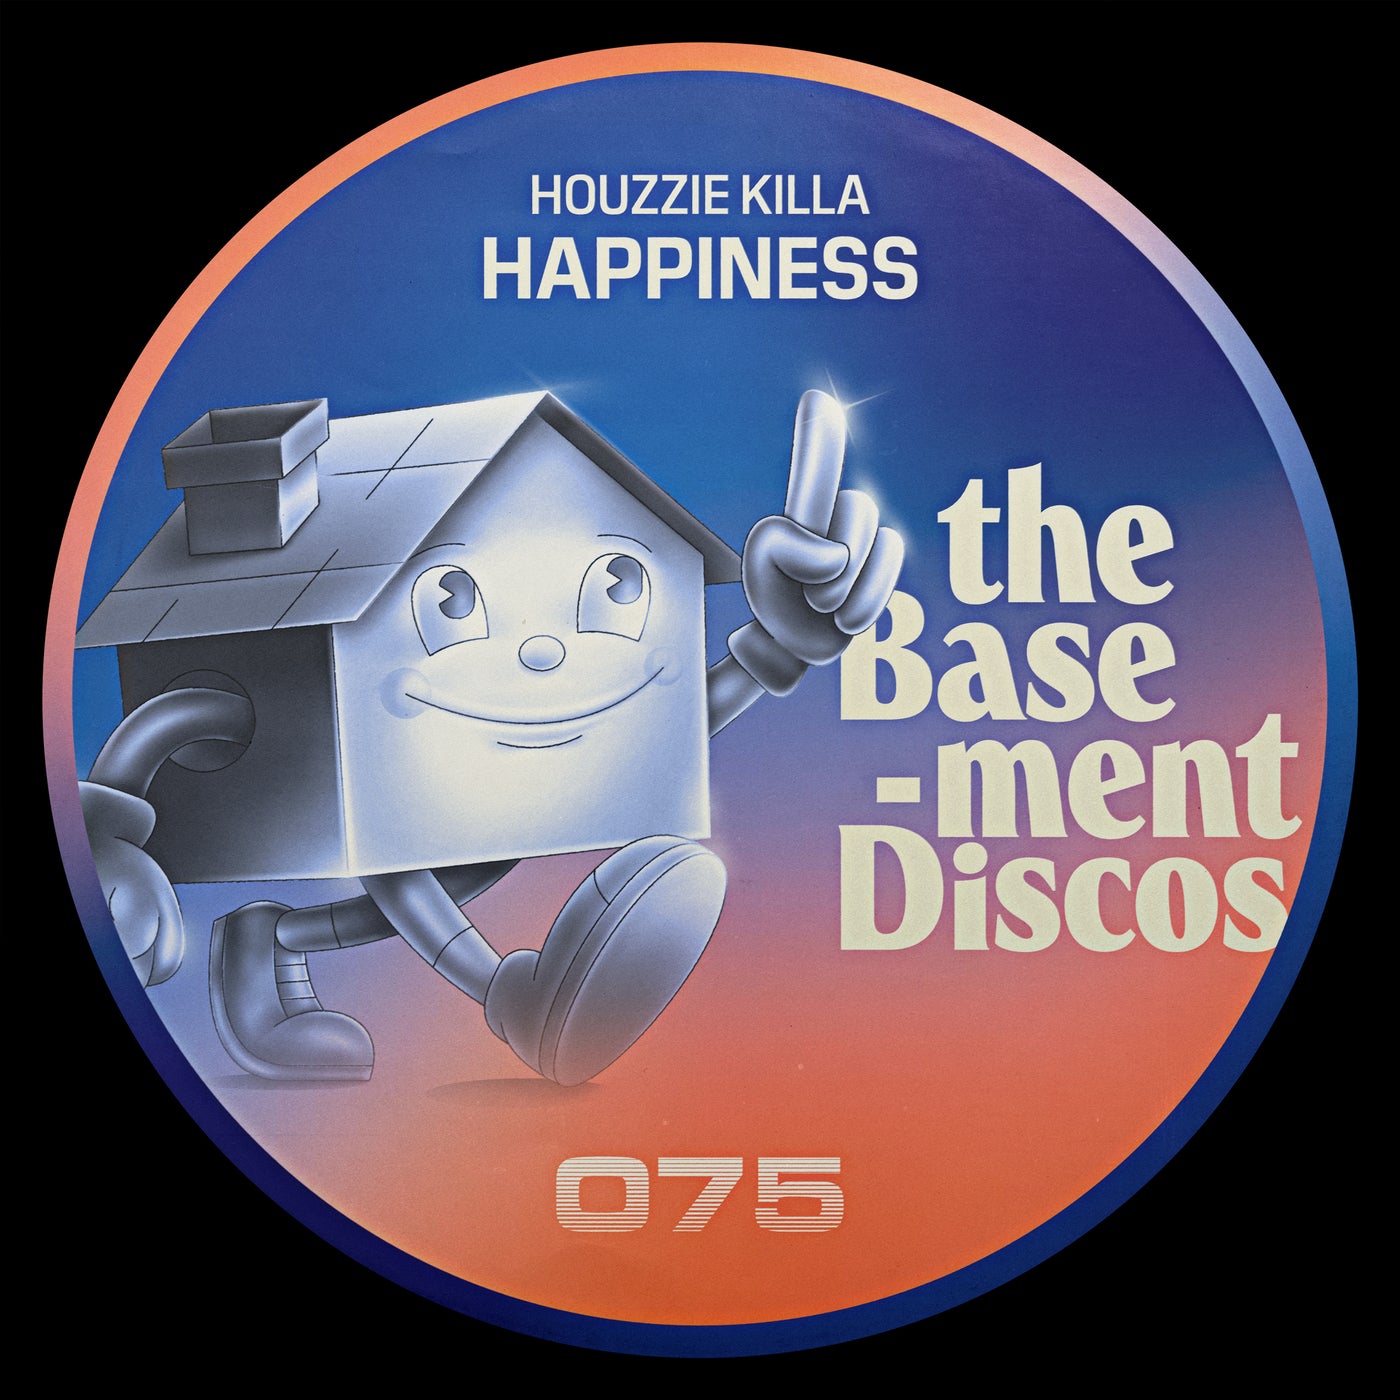 Download Happiness on Electrobuzz